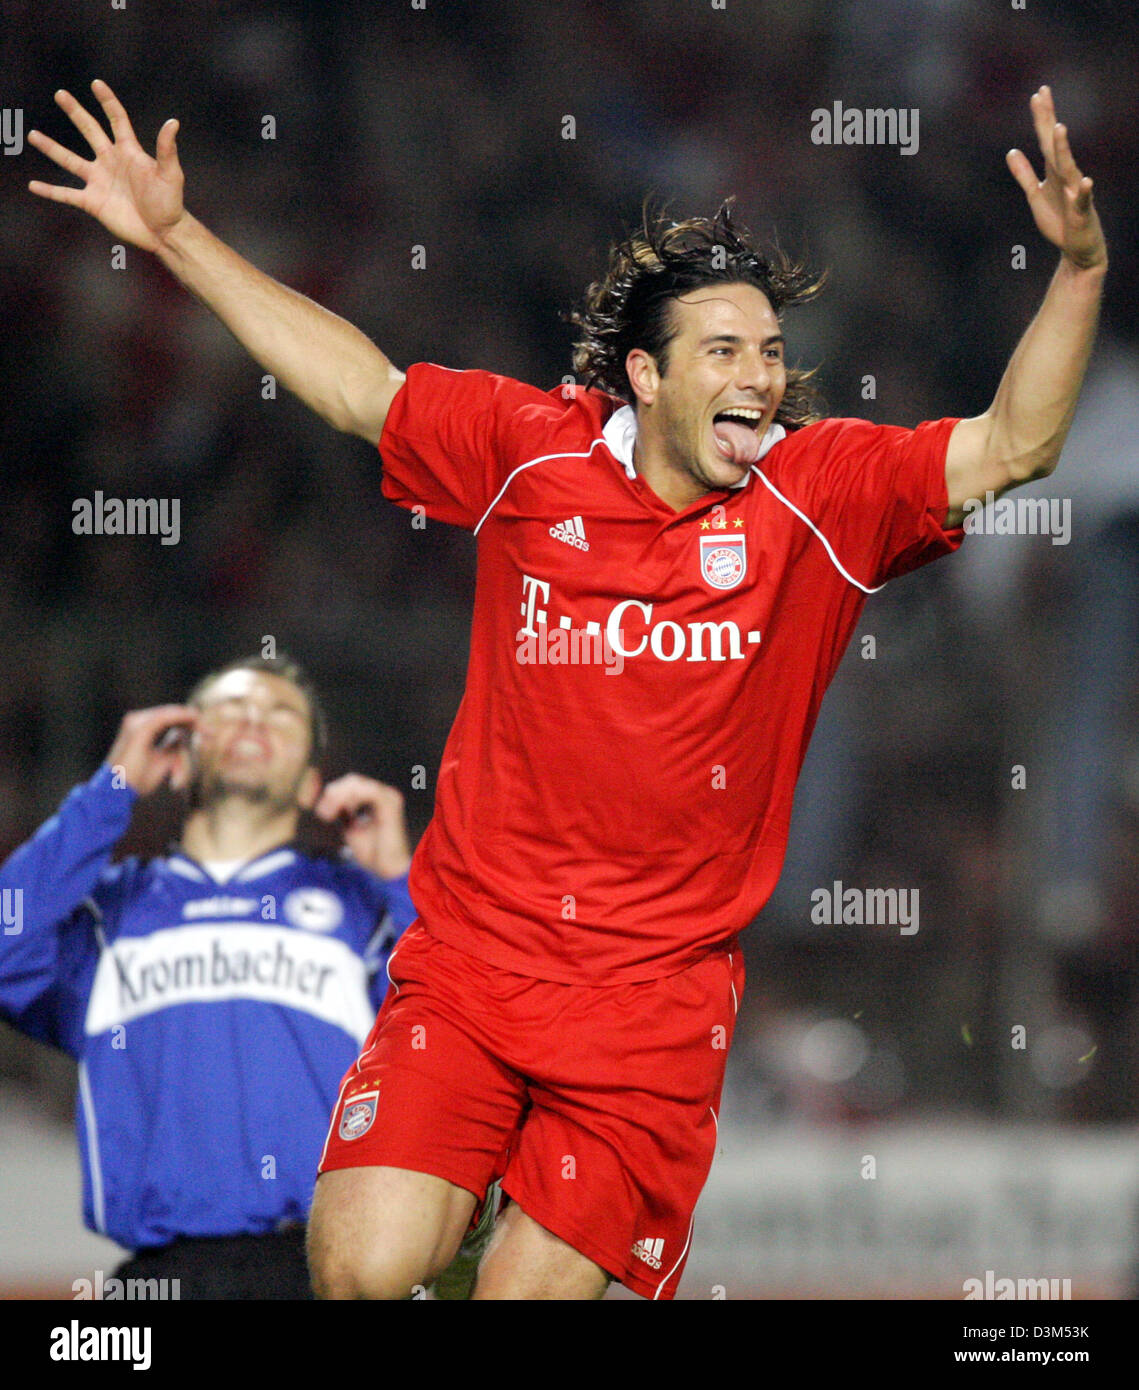 (dpa) - Munich's Claudio Pizarro celebrates his goal which led to the 2-1 final score and sticks out his tongue while Bielefeld's Heiko Westermann stands behind him during the Bundesliga soccer match Arminia Bielefeld vs. Bayern Munich at the Schueco arena in Bielefeld, Germany, 19 November 2005. (Attention: NEW EMBARGO CONDITIONS! The DFL has prohibited publication and further uti Stock Photo